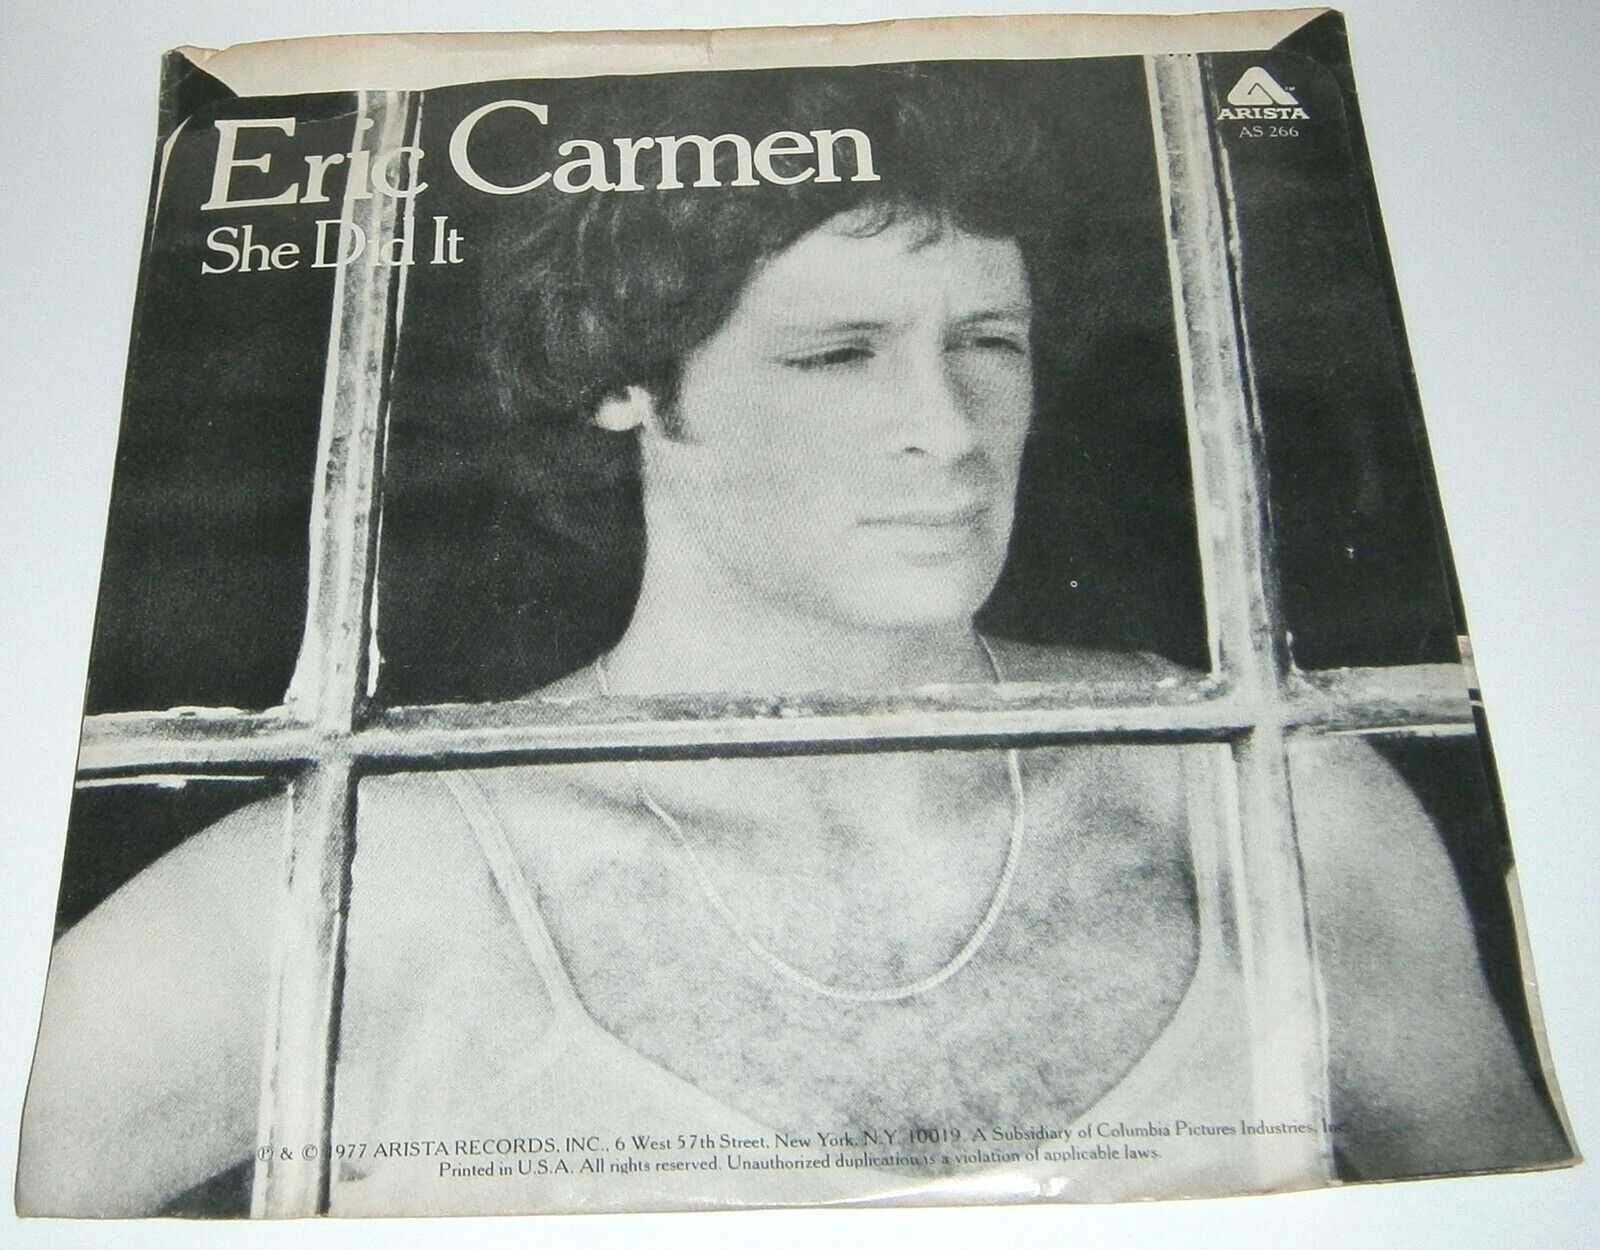 VINTAGE 45 ~ ERIC CARMEN, SHE DID IT b/w SOMEDAY On ARISTA ~ PICTURE SLEEVE Only